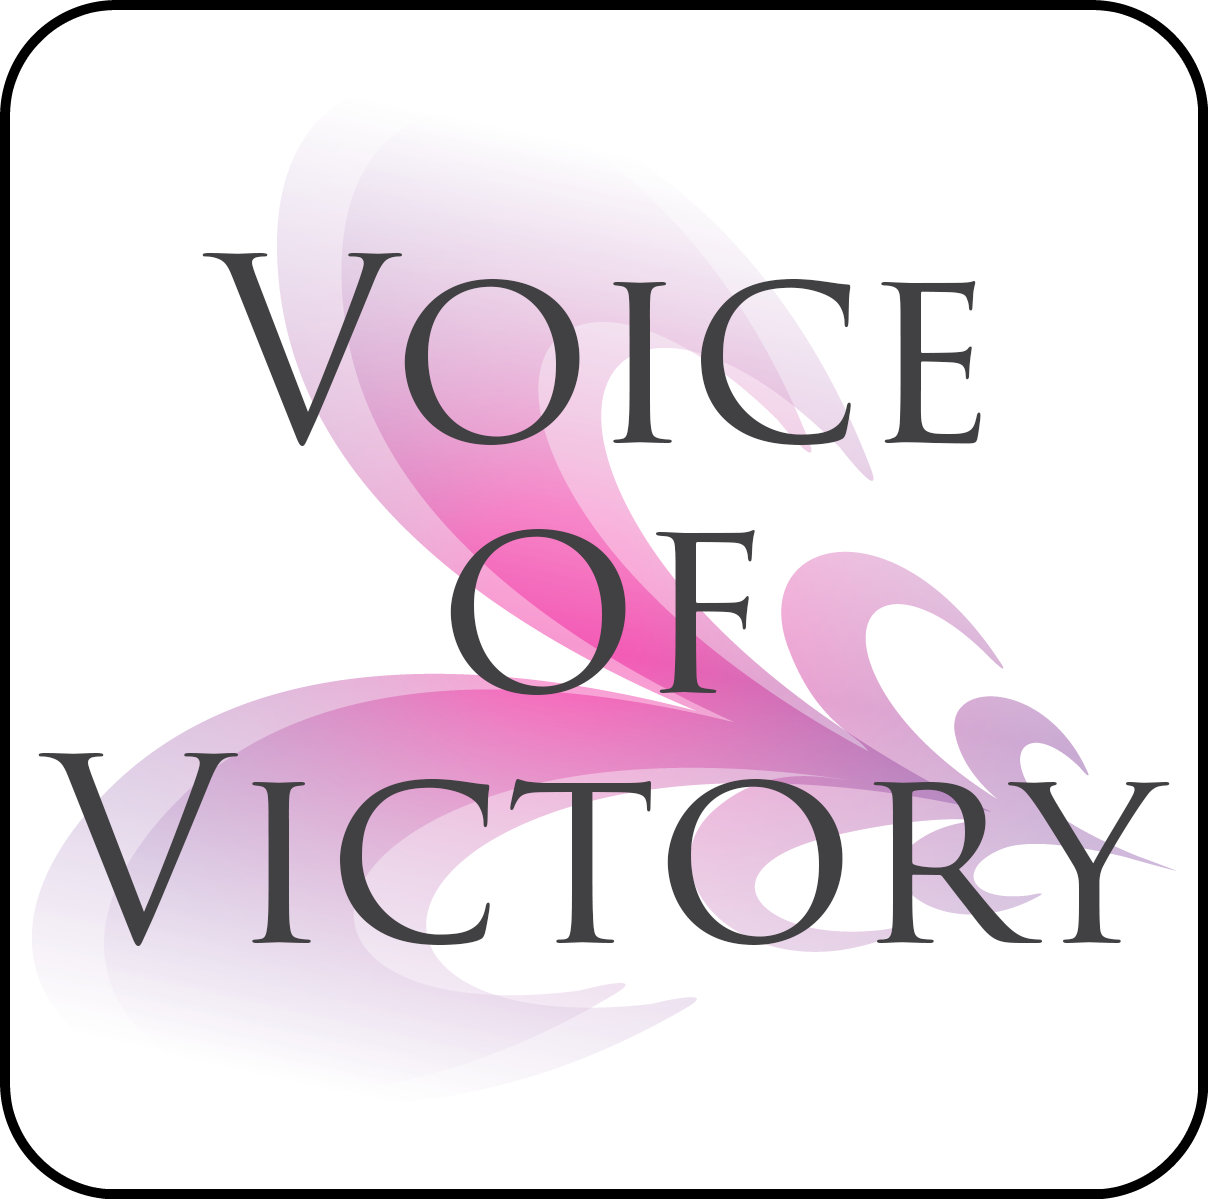 Voice of Victory Newsletter Link for SPA Women's Ministry